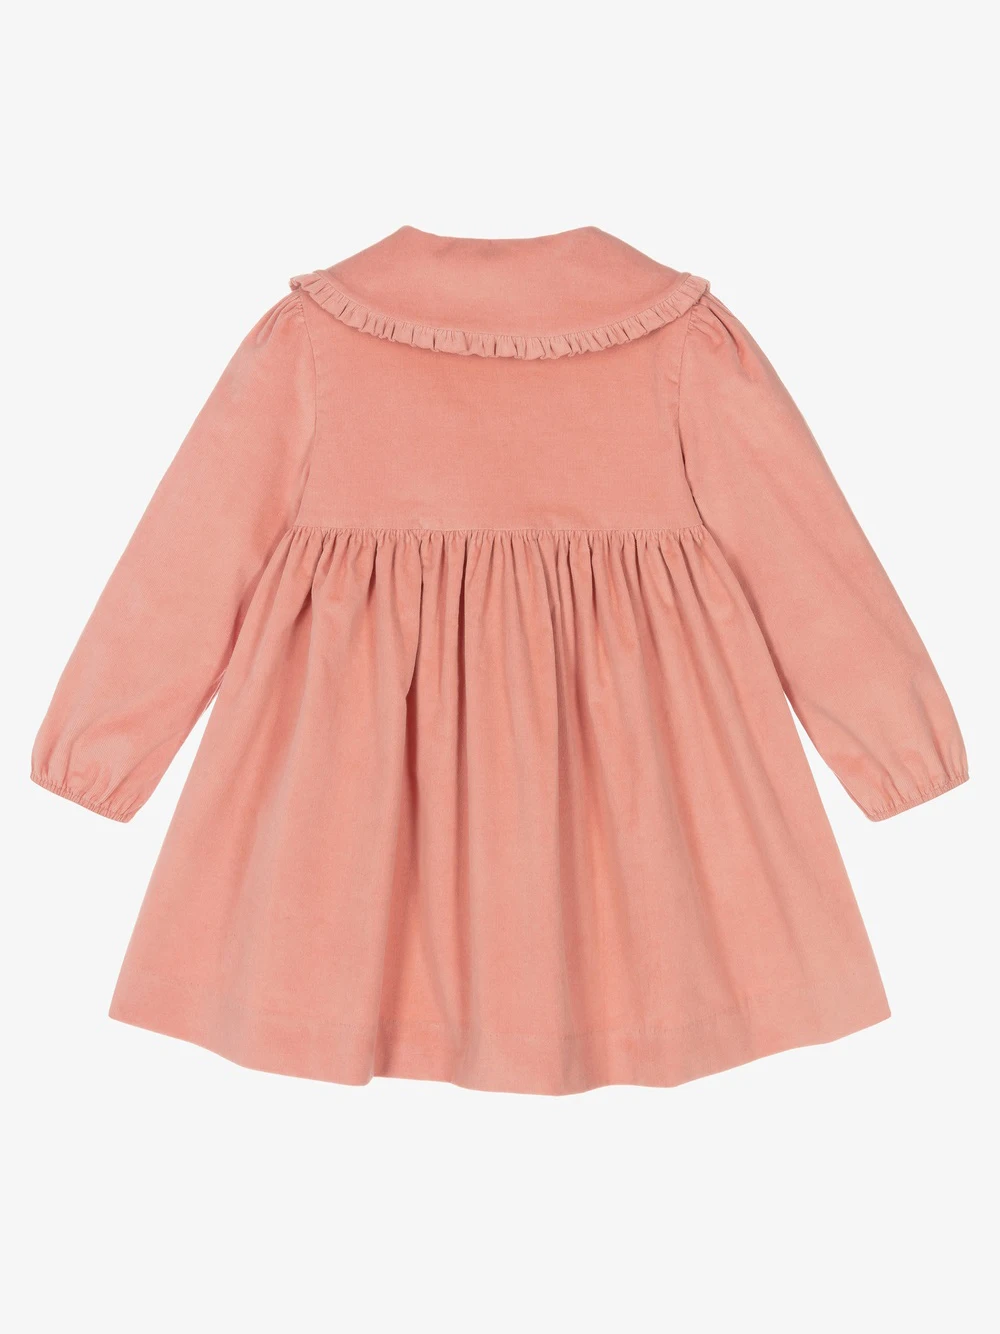 Custom cotton or polyester corduroy toddler dresses with embroidery clothing kids girls peach color girl child dress with collar